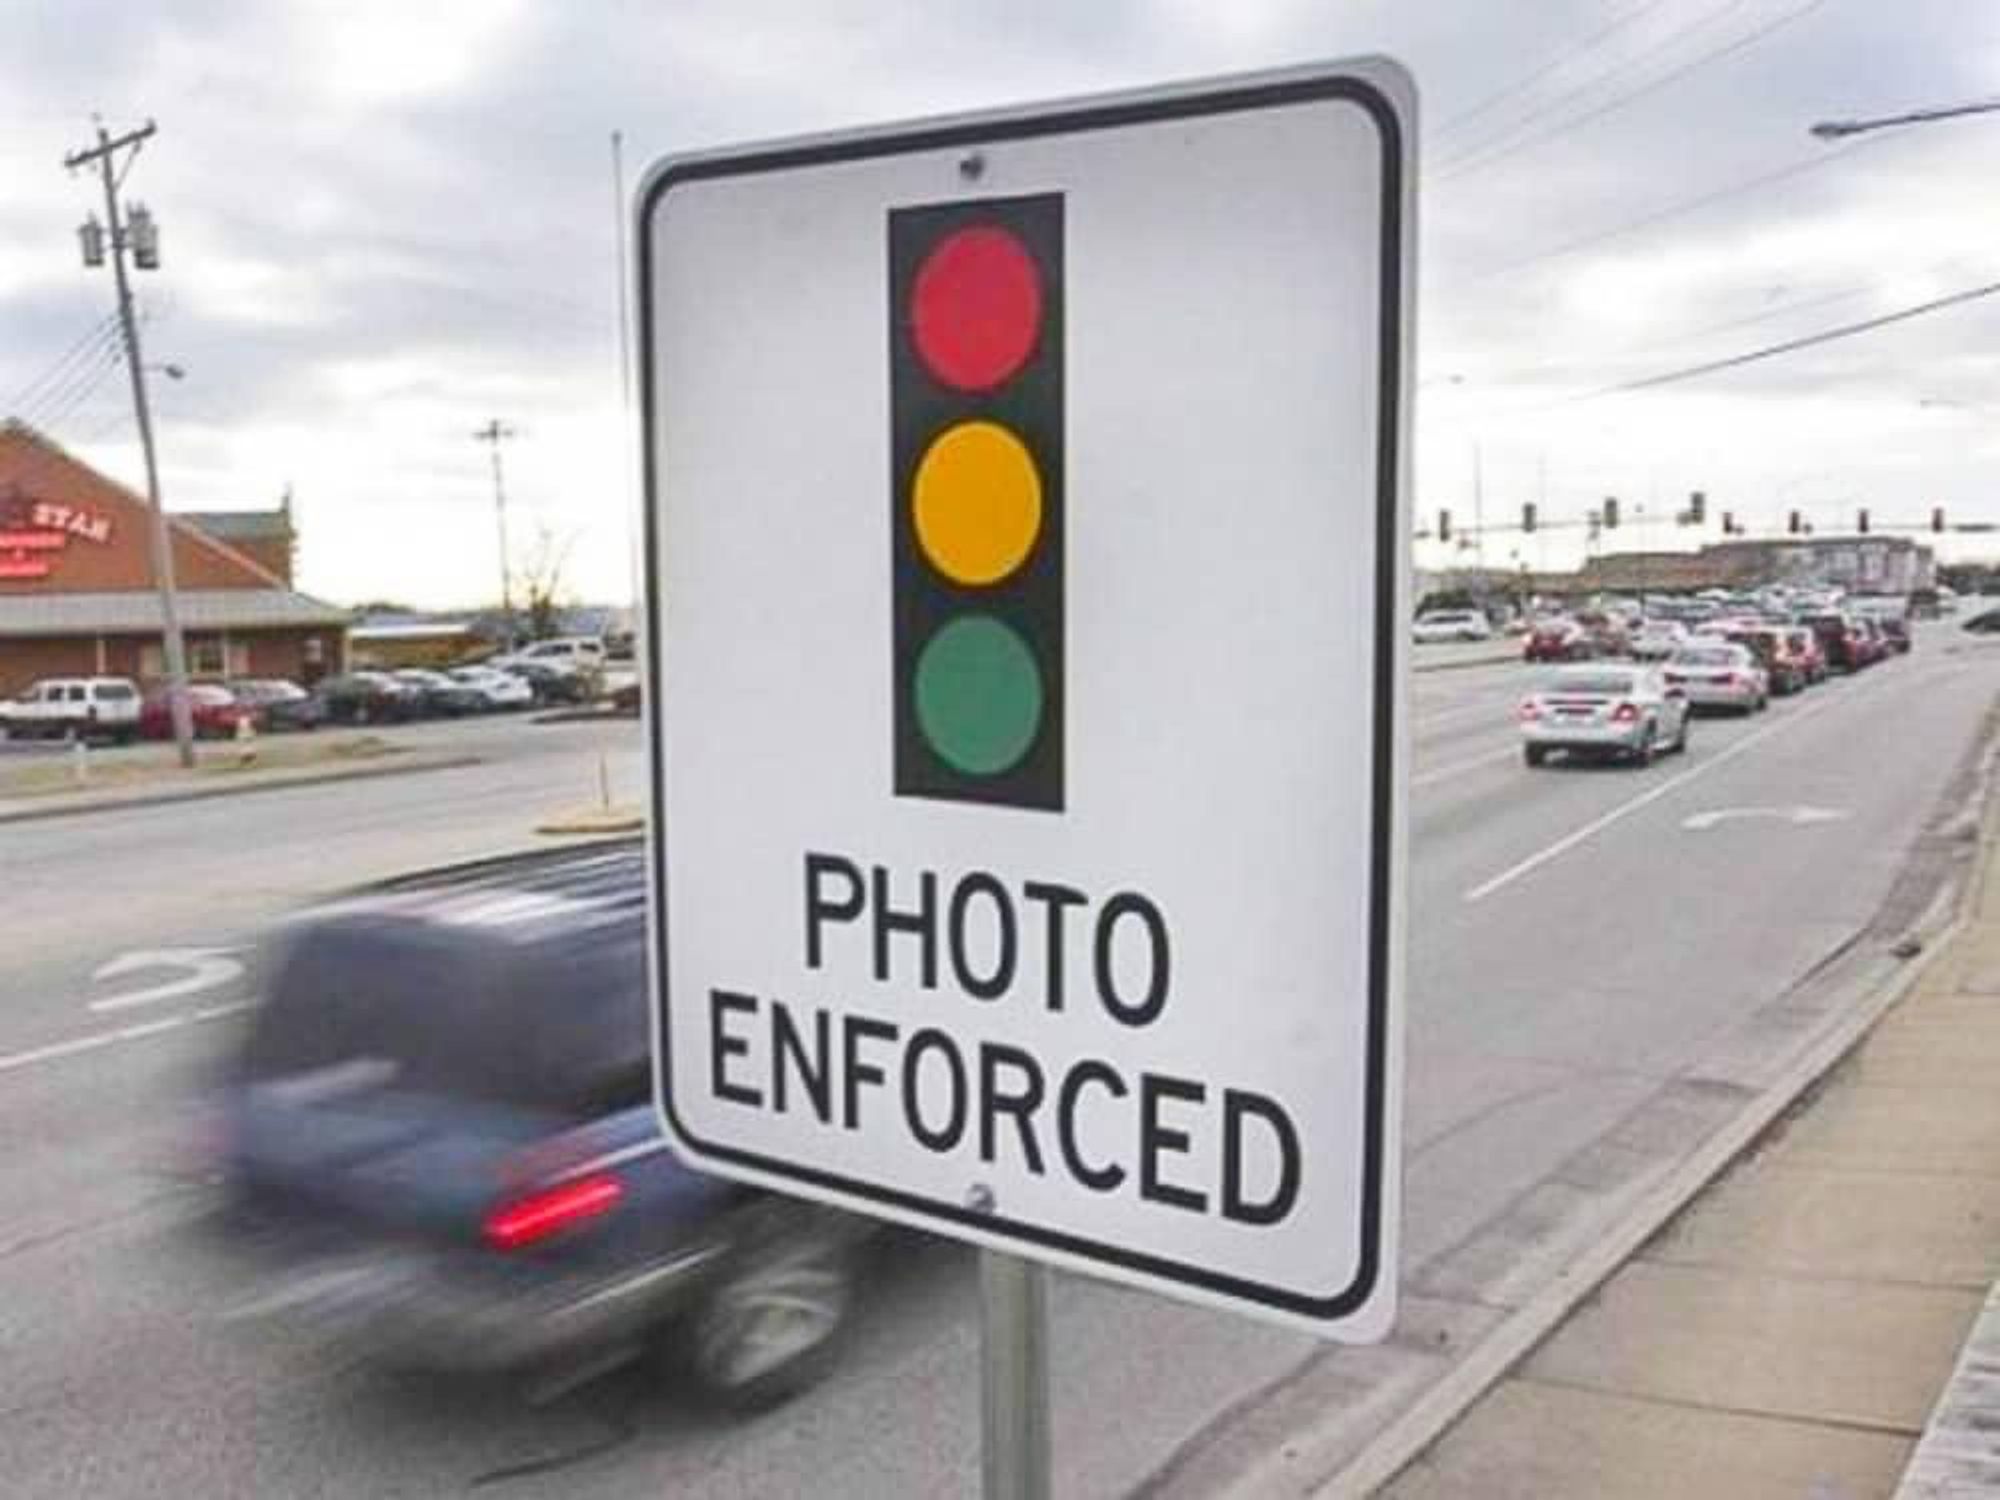 red light camera, photo enforced sign, traffic